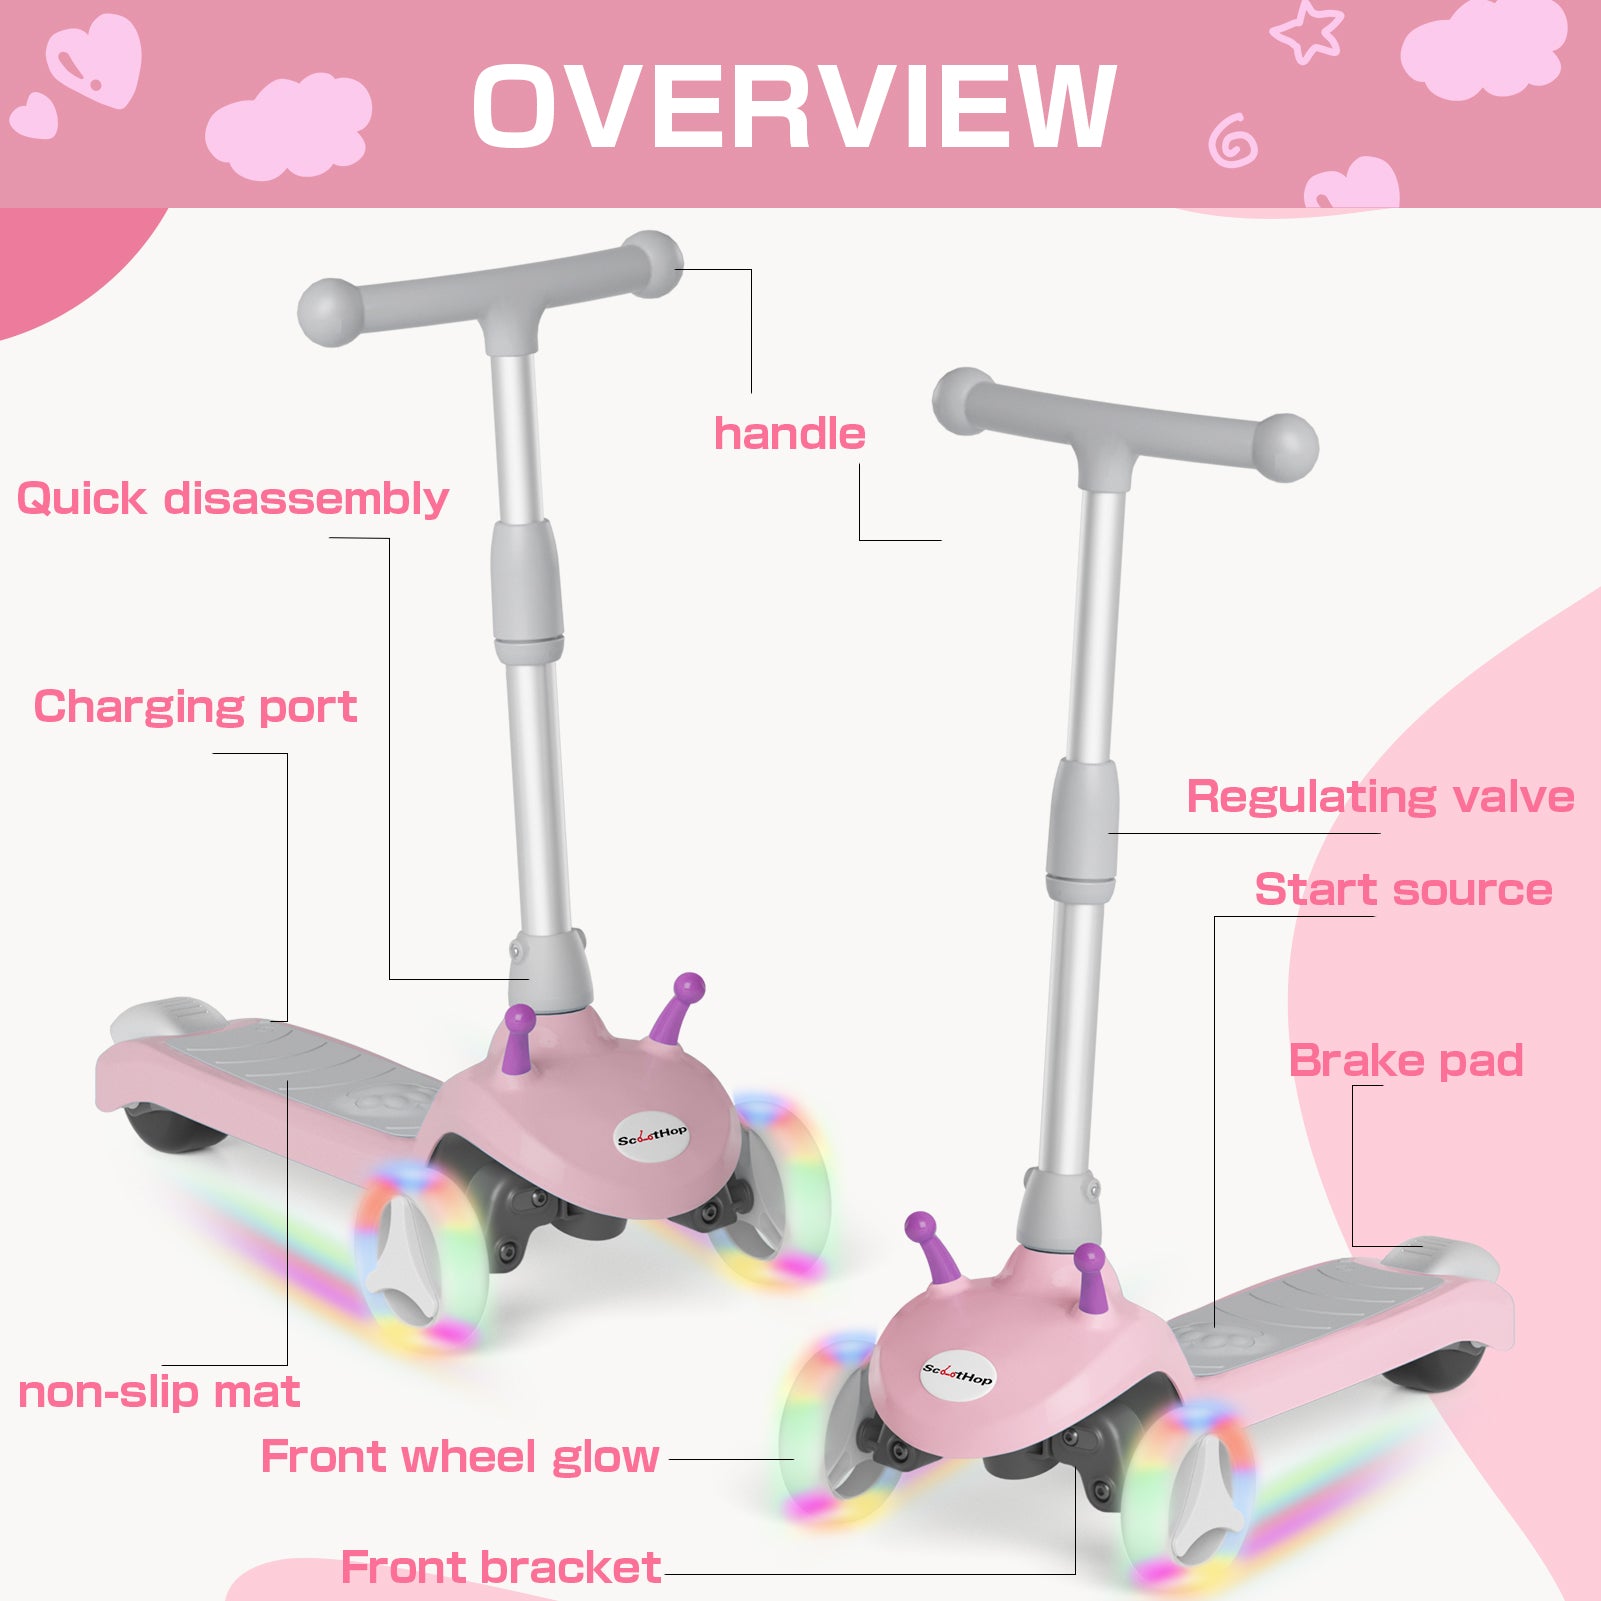 ScootHop K3- Kid Electric Scooter,LED Light-up Wheels, 3 Height Adjustable, C-Shaped Handle, Lean-to Steer Design